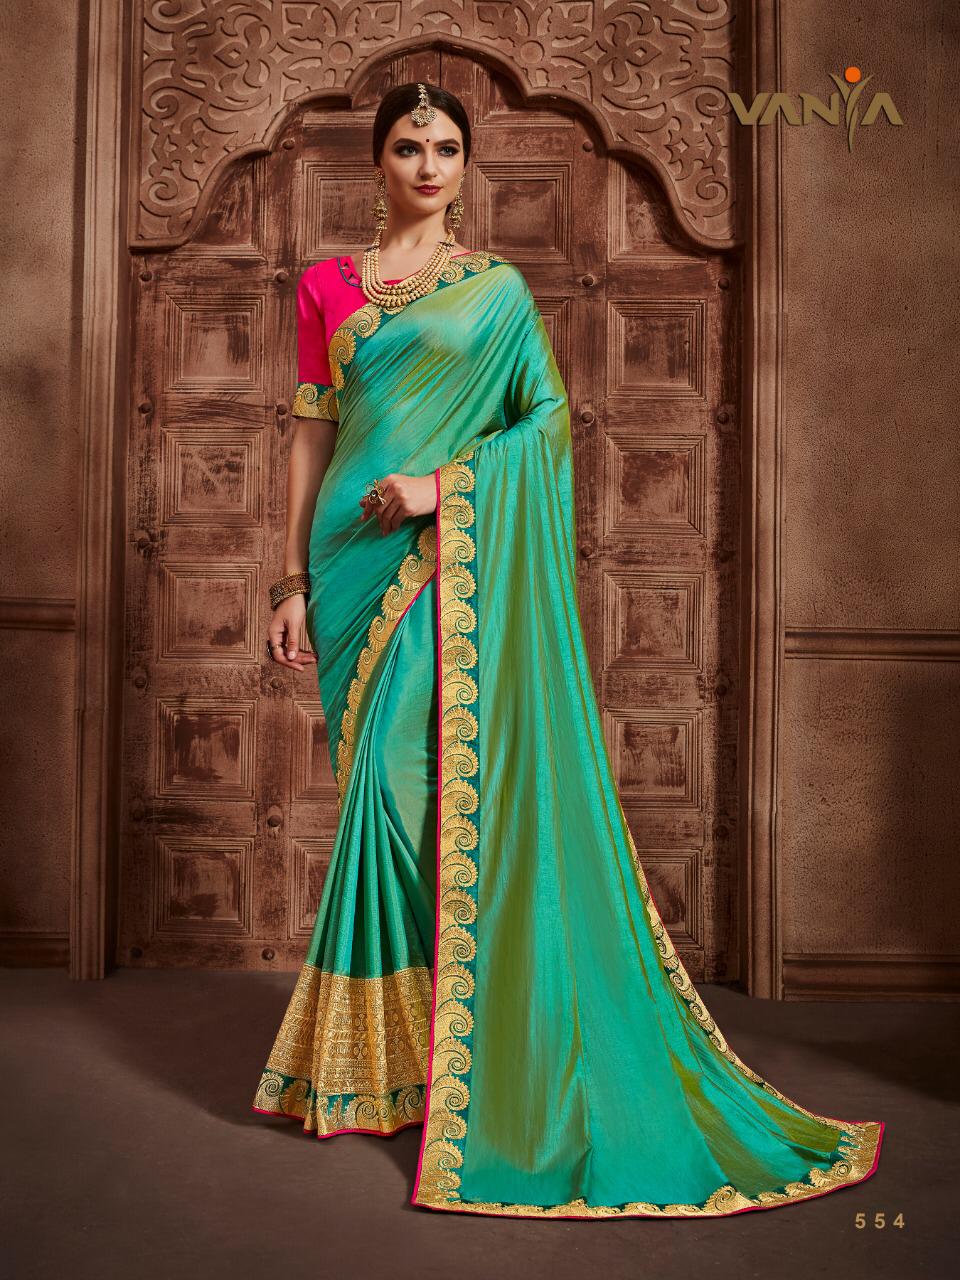 Vaniya 545 Series By Vanya 545 To 562 Series Indian Traditional Wear Collection Beautiful Stylish Fancy Colorful Party Wear & Occasional Wear Fancy Sarees At Wholesale Price